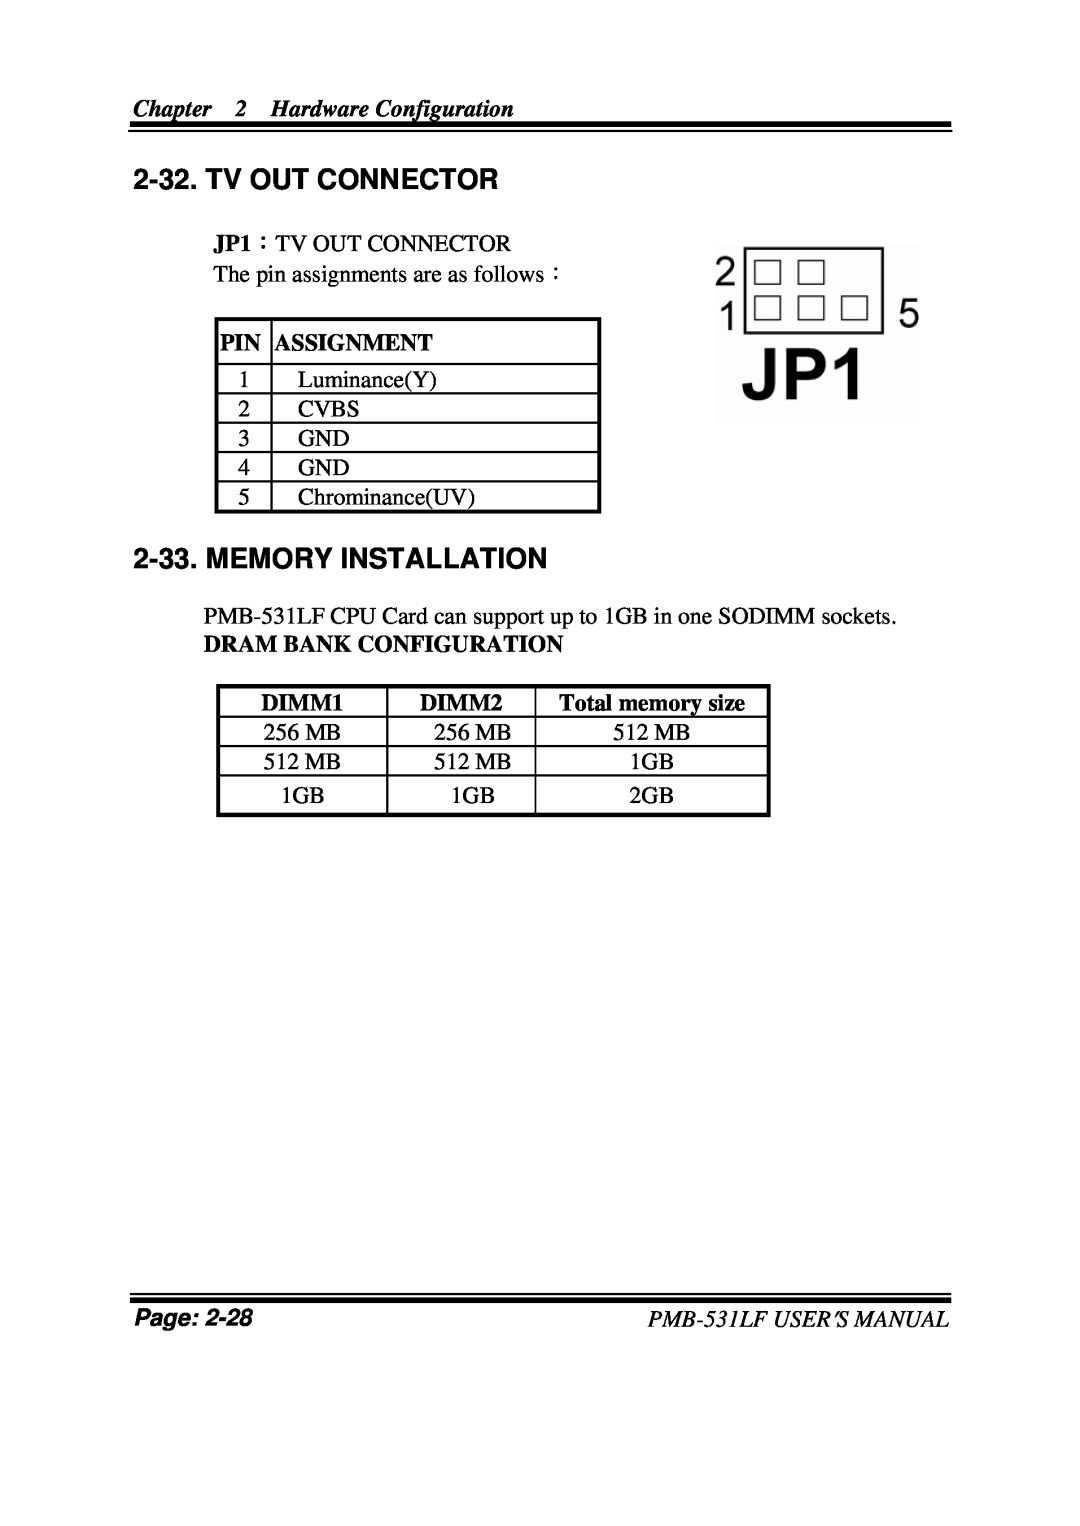 Intel PMB-531LF Tv Out Connector, Memory Installation, Dram Bank Configuration, DIMM1, DIMM2, Total memory size, Page 